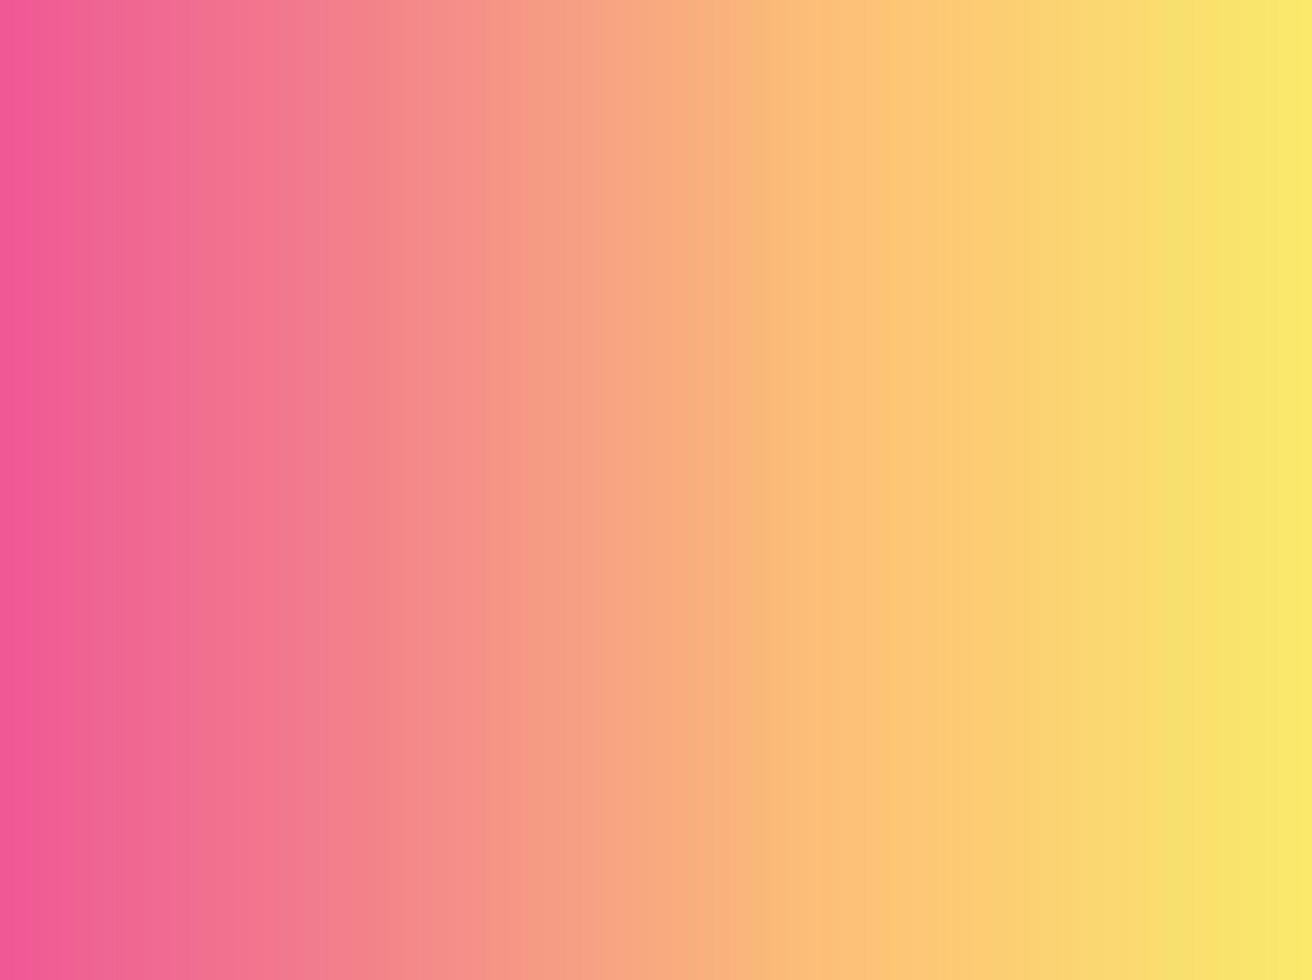 Vector illustration of colorful gradient background. Suitable for poster, cover, banner, card, etc